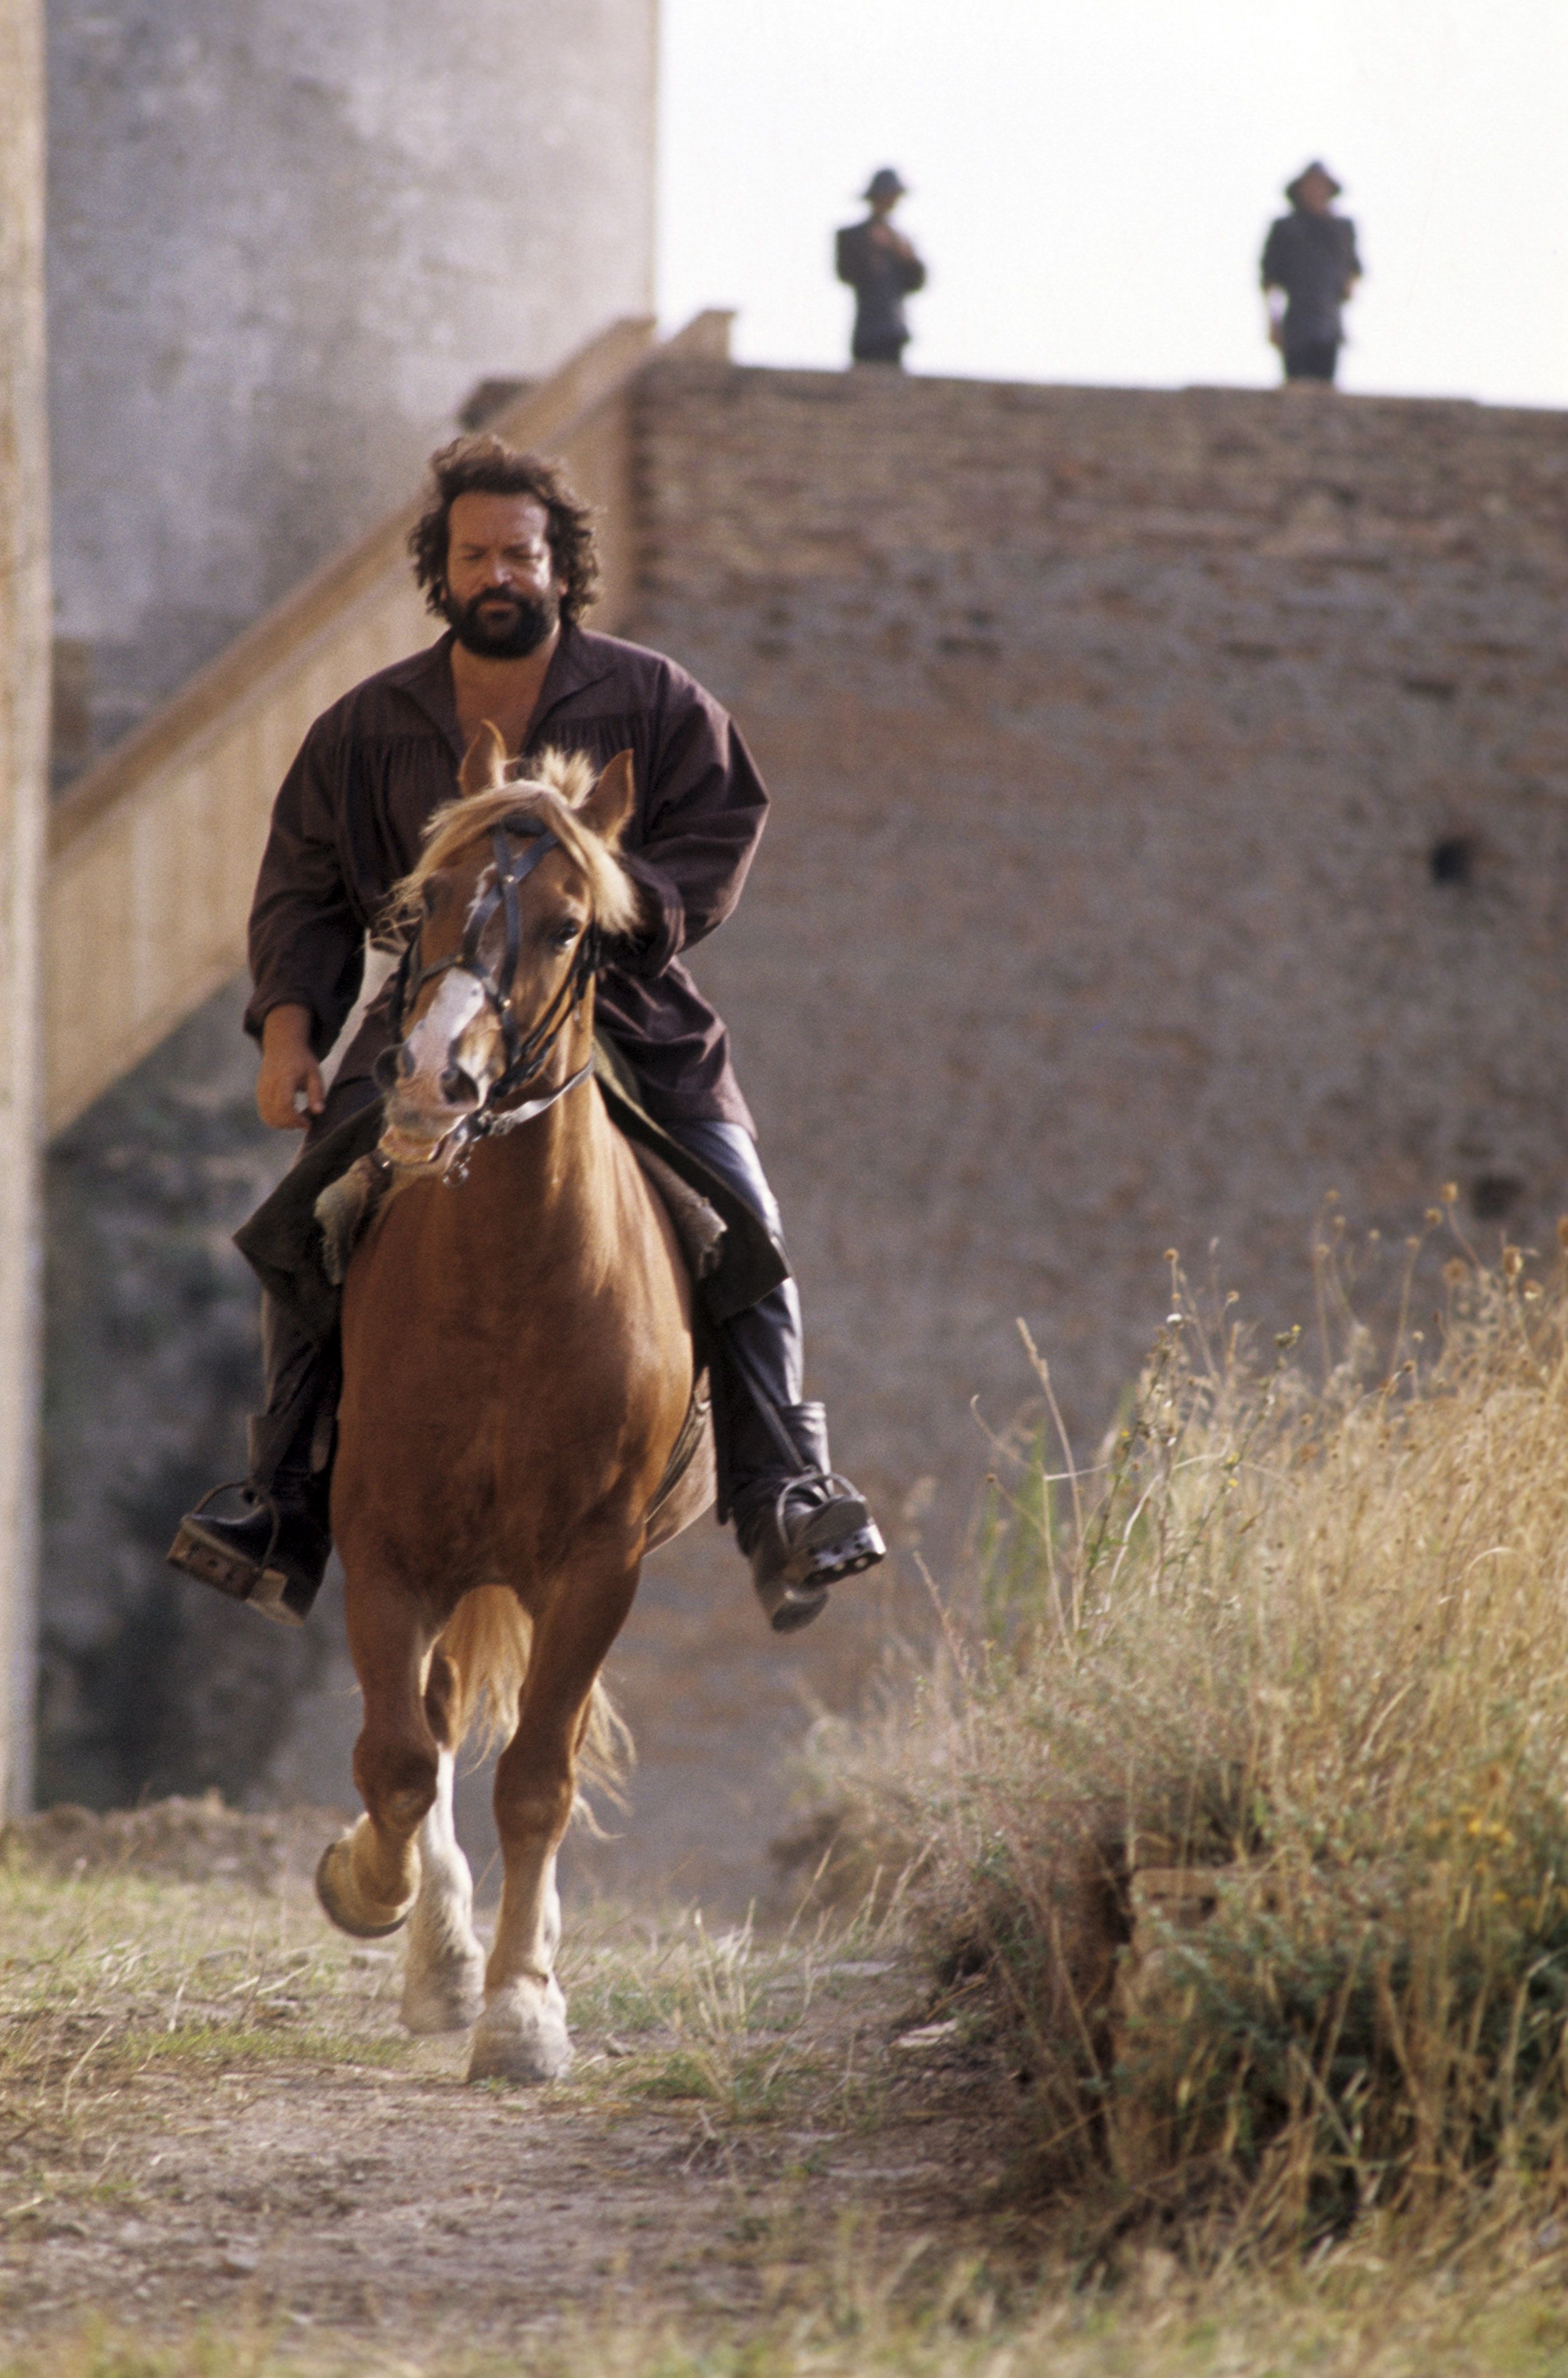 Spaghetti western star Bud Spencer dies at the age of 86